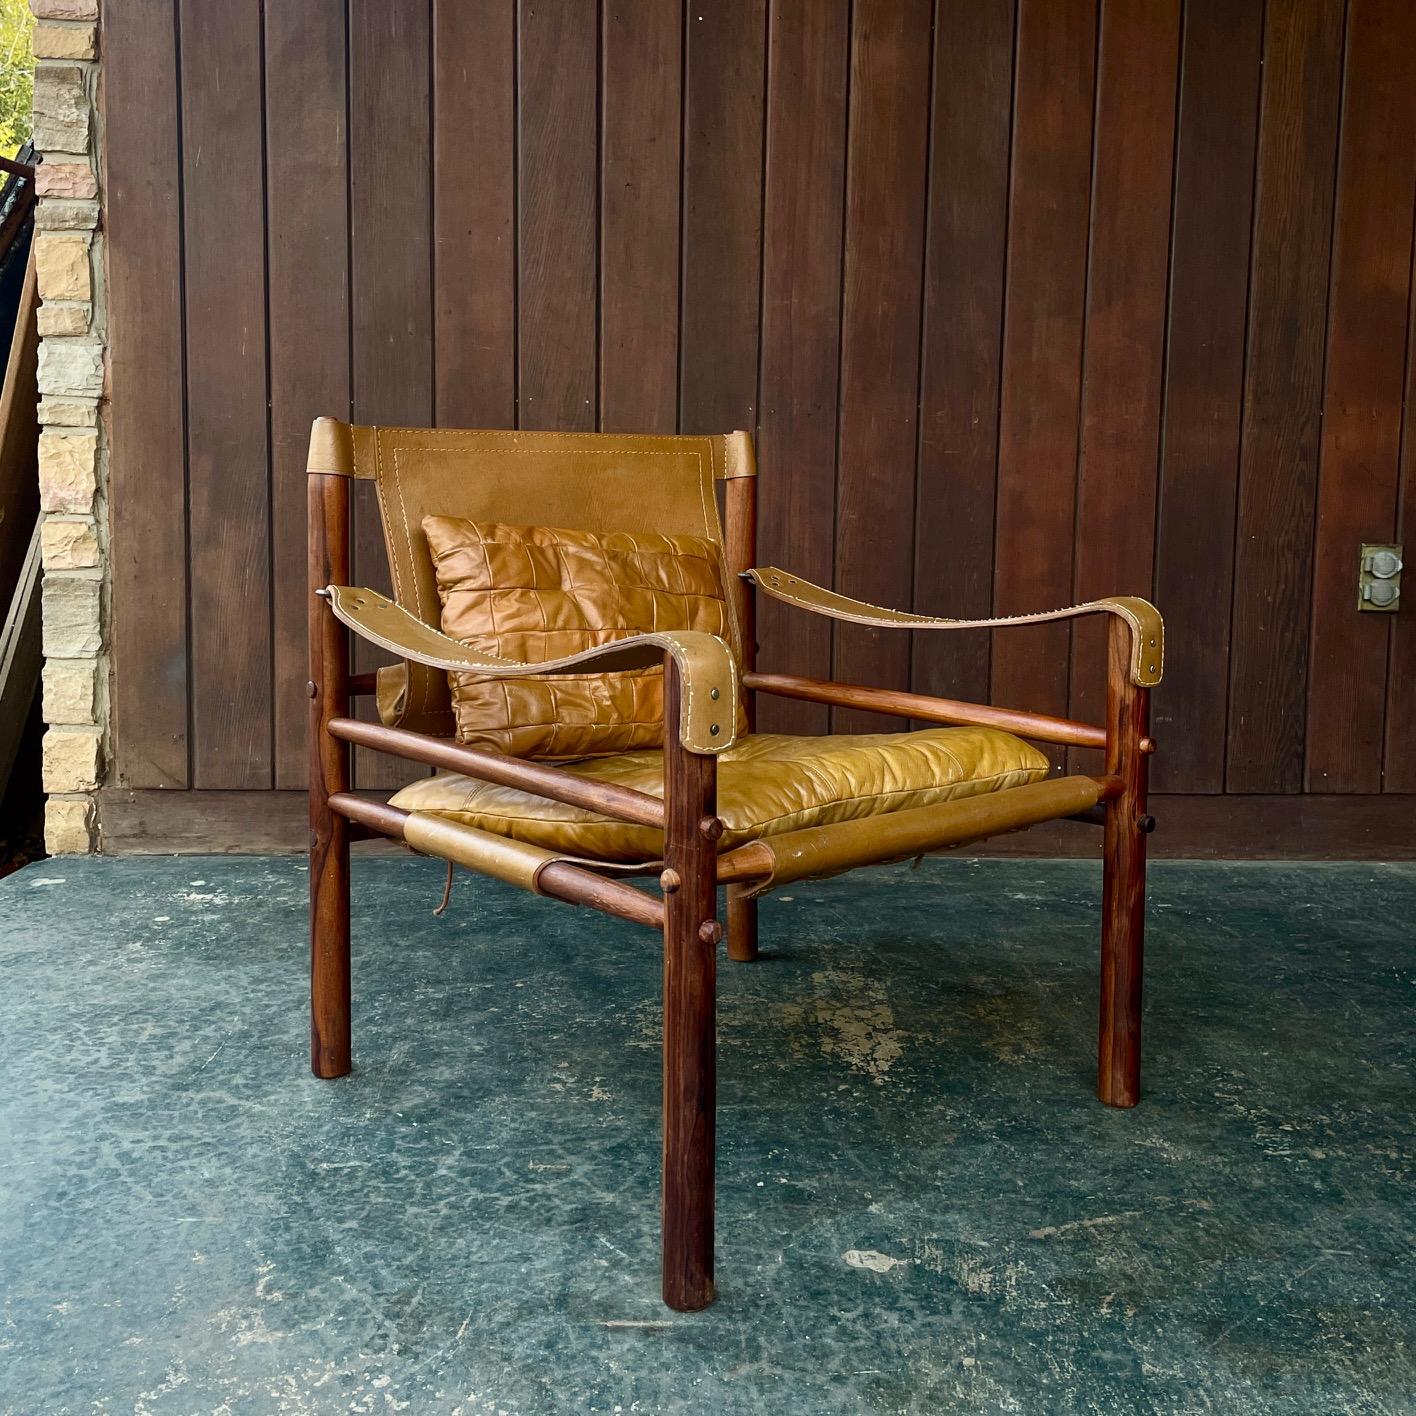 The Sirocco safari chair designed by Arne Norell in 1966. This example is in camel-colored leather; with two cushions and slings with brass fittings. Designed to breakdown for flat pack shipping or Camping on the Serengeti.

Missing the brass strap